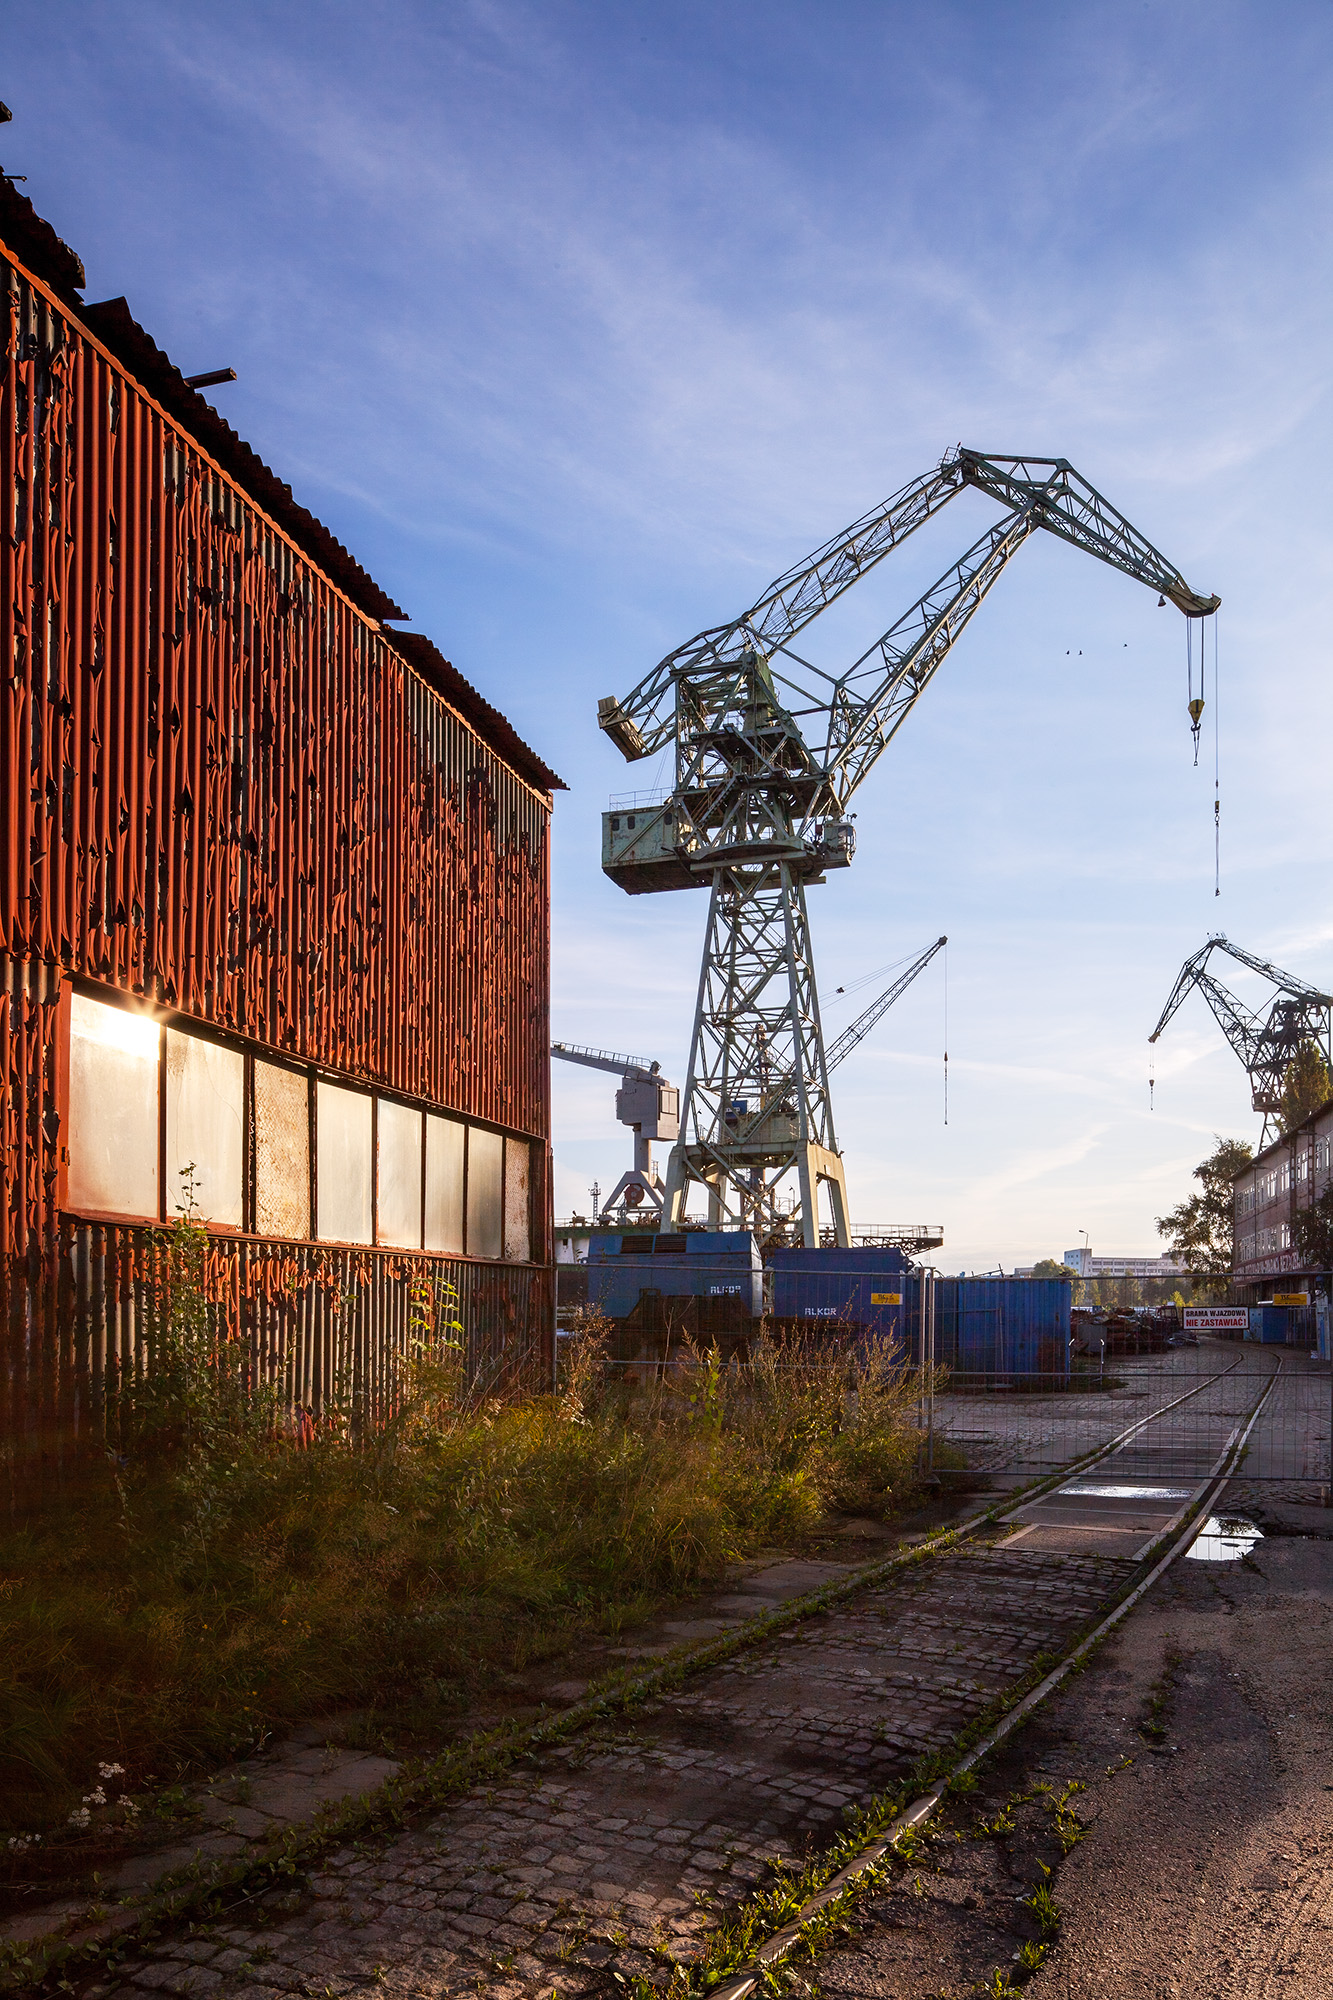 This image, captured from the shipyards of Gdansk, paints a vivid picture of industrial heritage. To the left, a weathered maintenance...